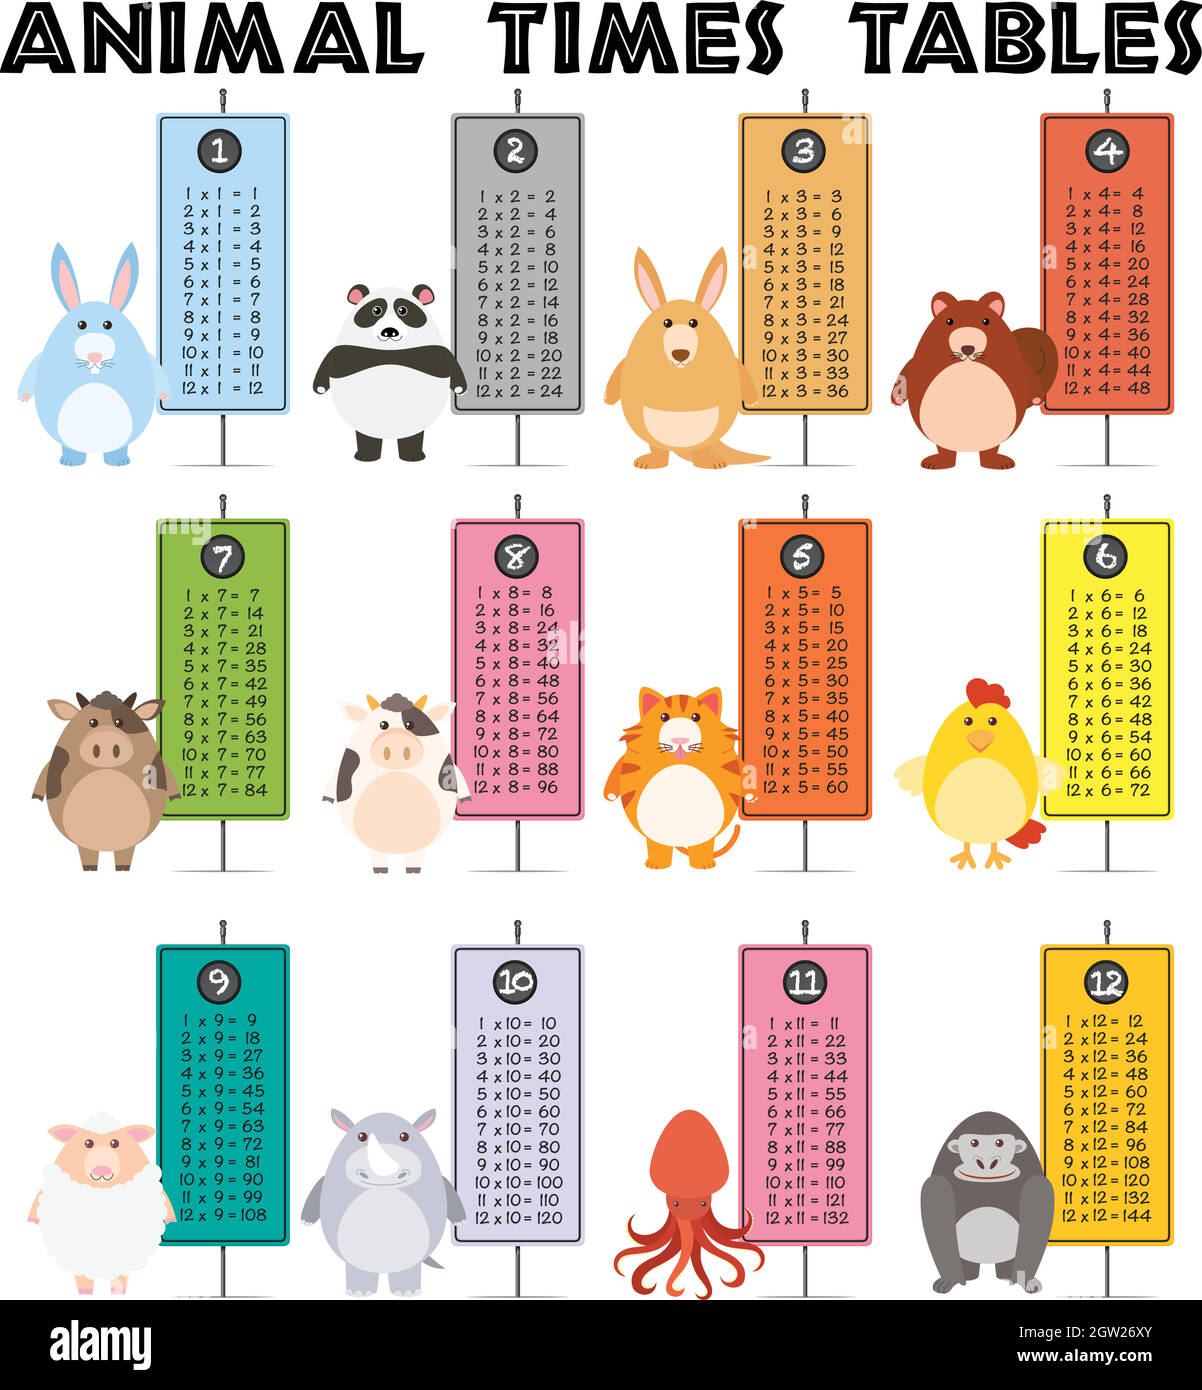 Animal times table on white background Stock Vector